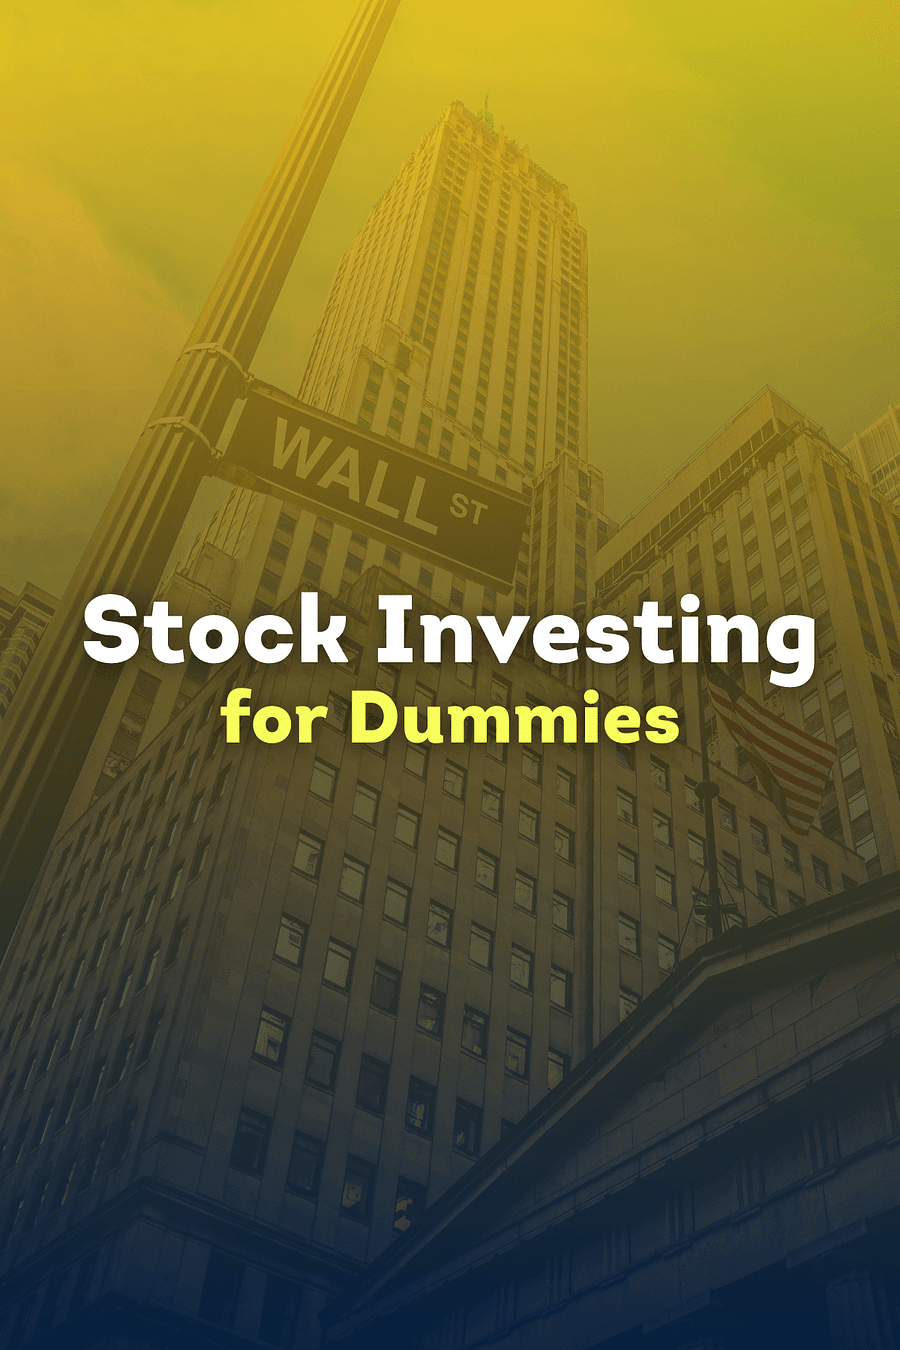 Stock Investing For Dummies by Paul J. Mladjenovic - Book Summary